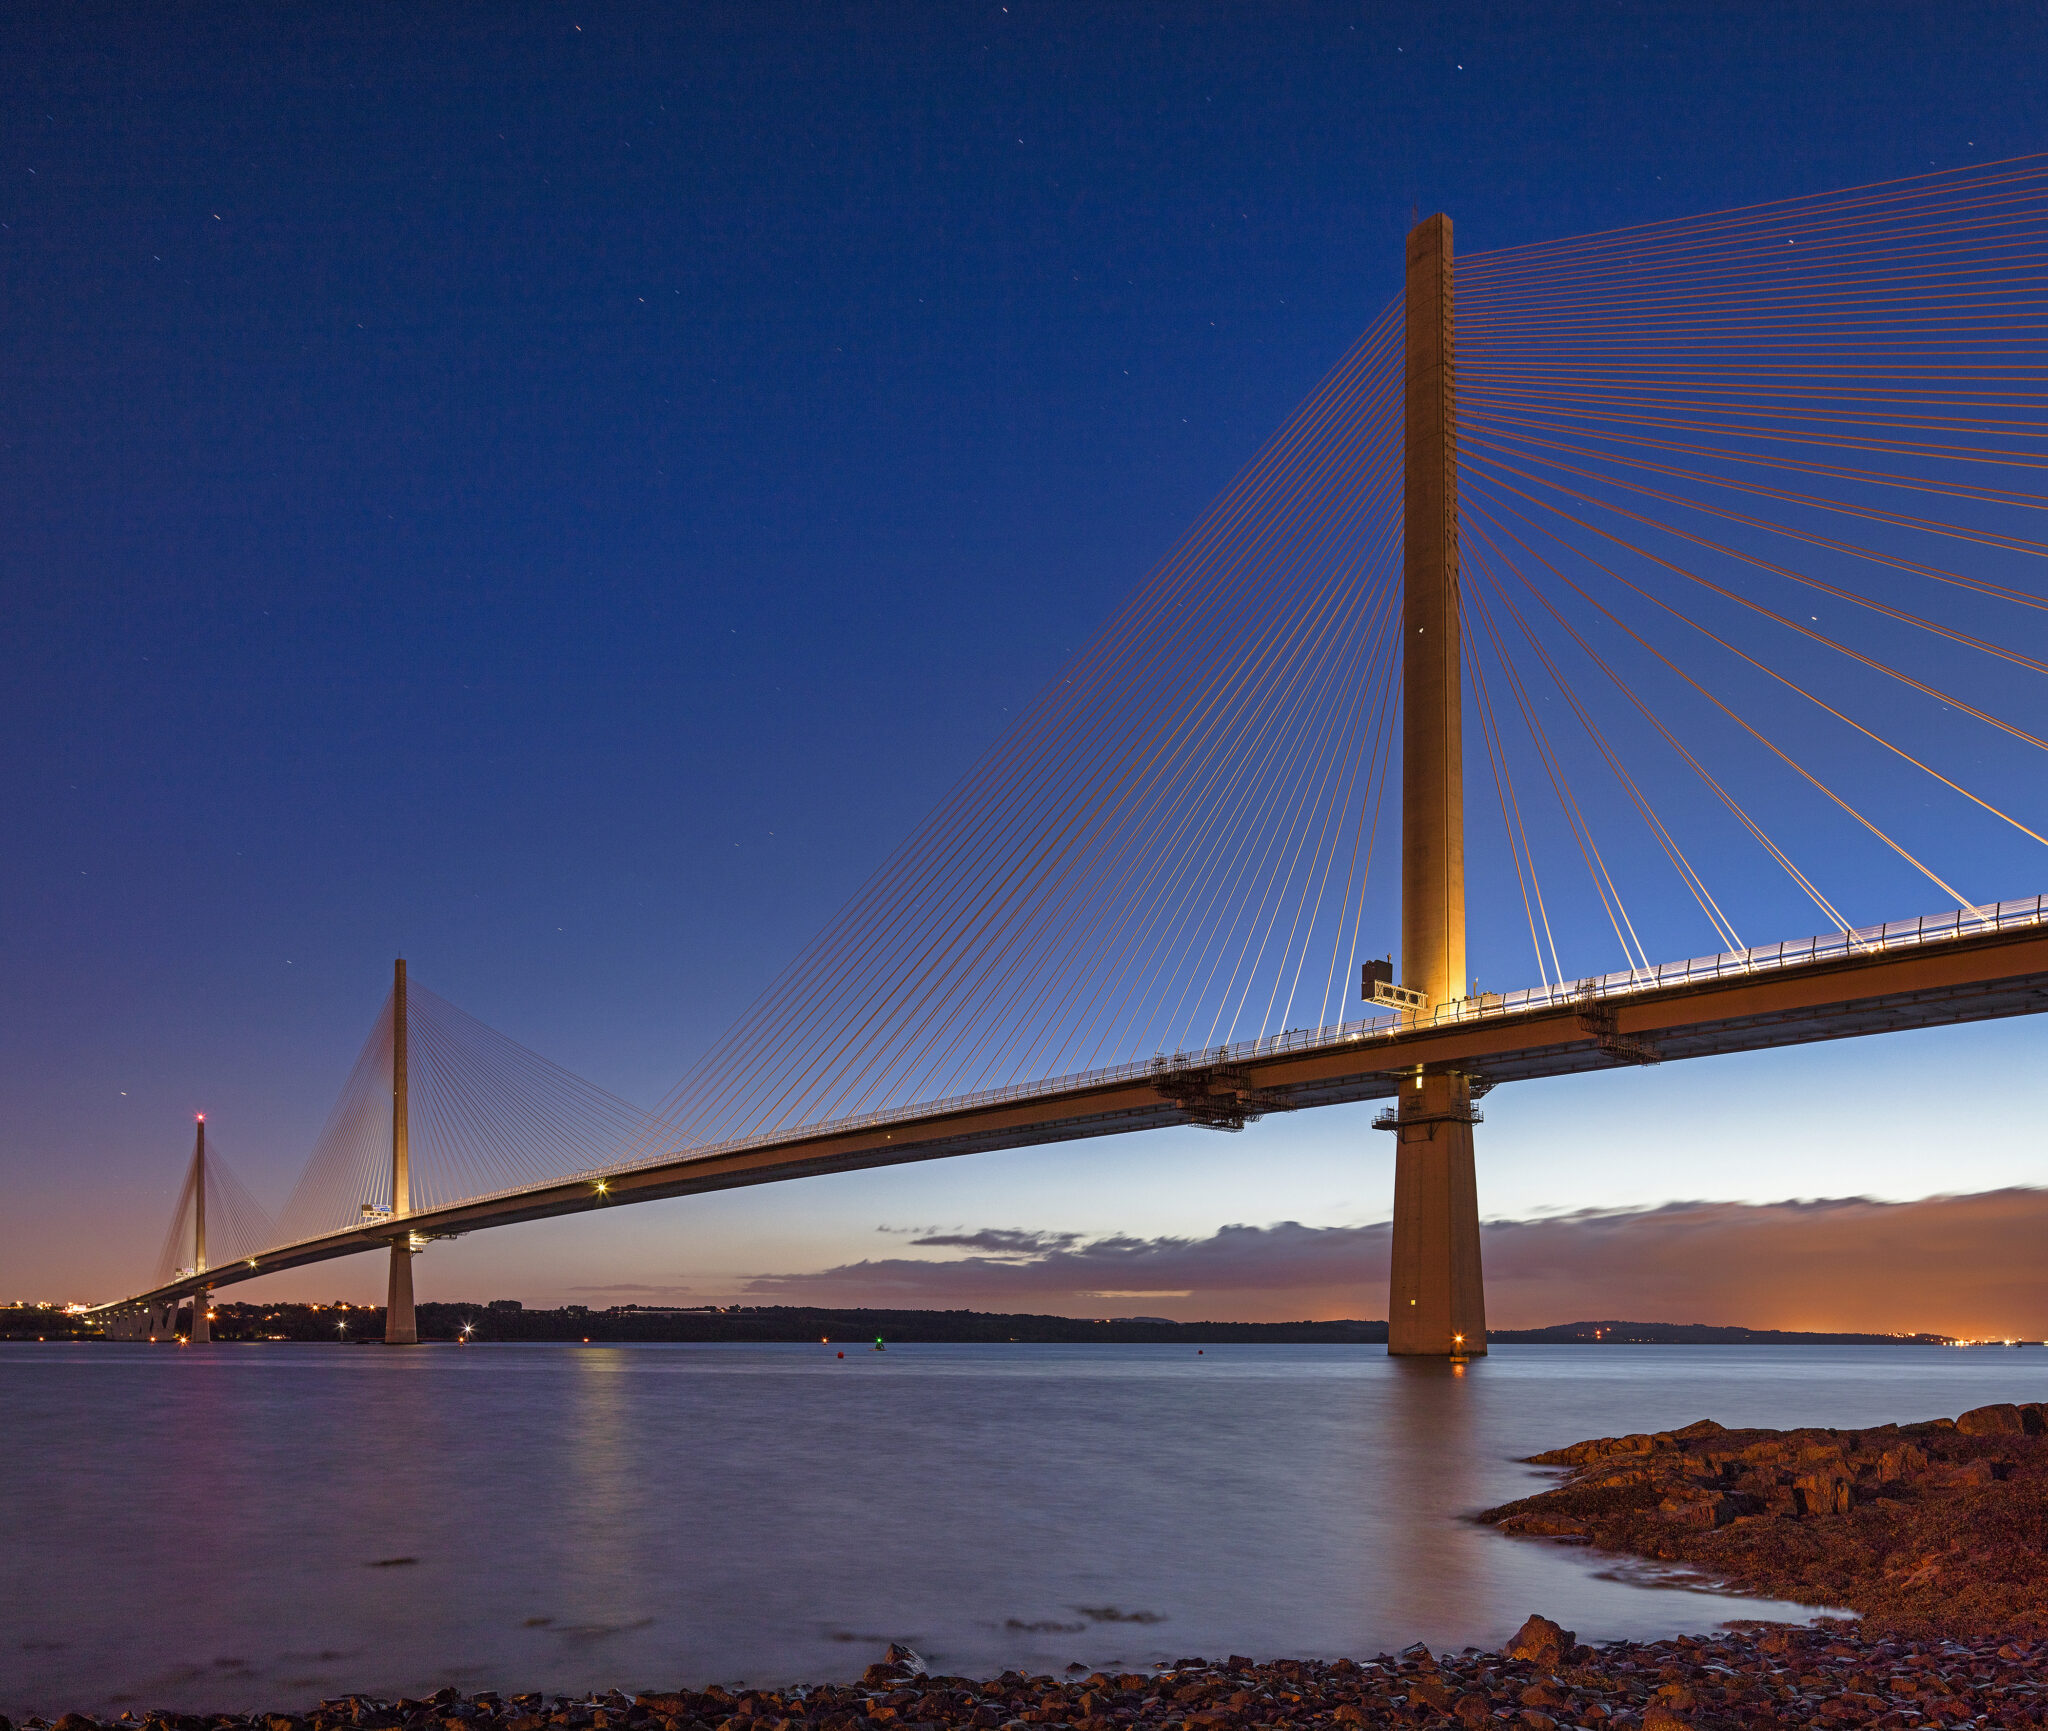 QUEENSFERRY CROSSING CLOSED DUE TO ADVERSE WEATHER